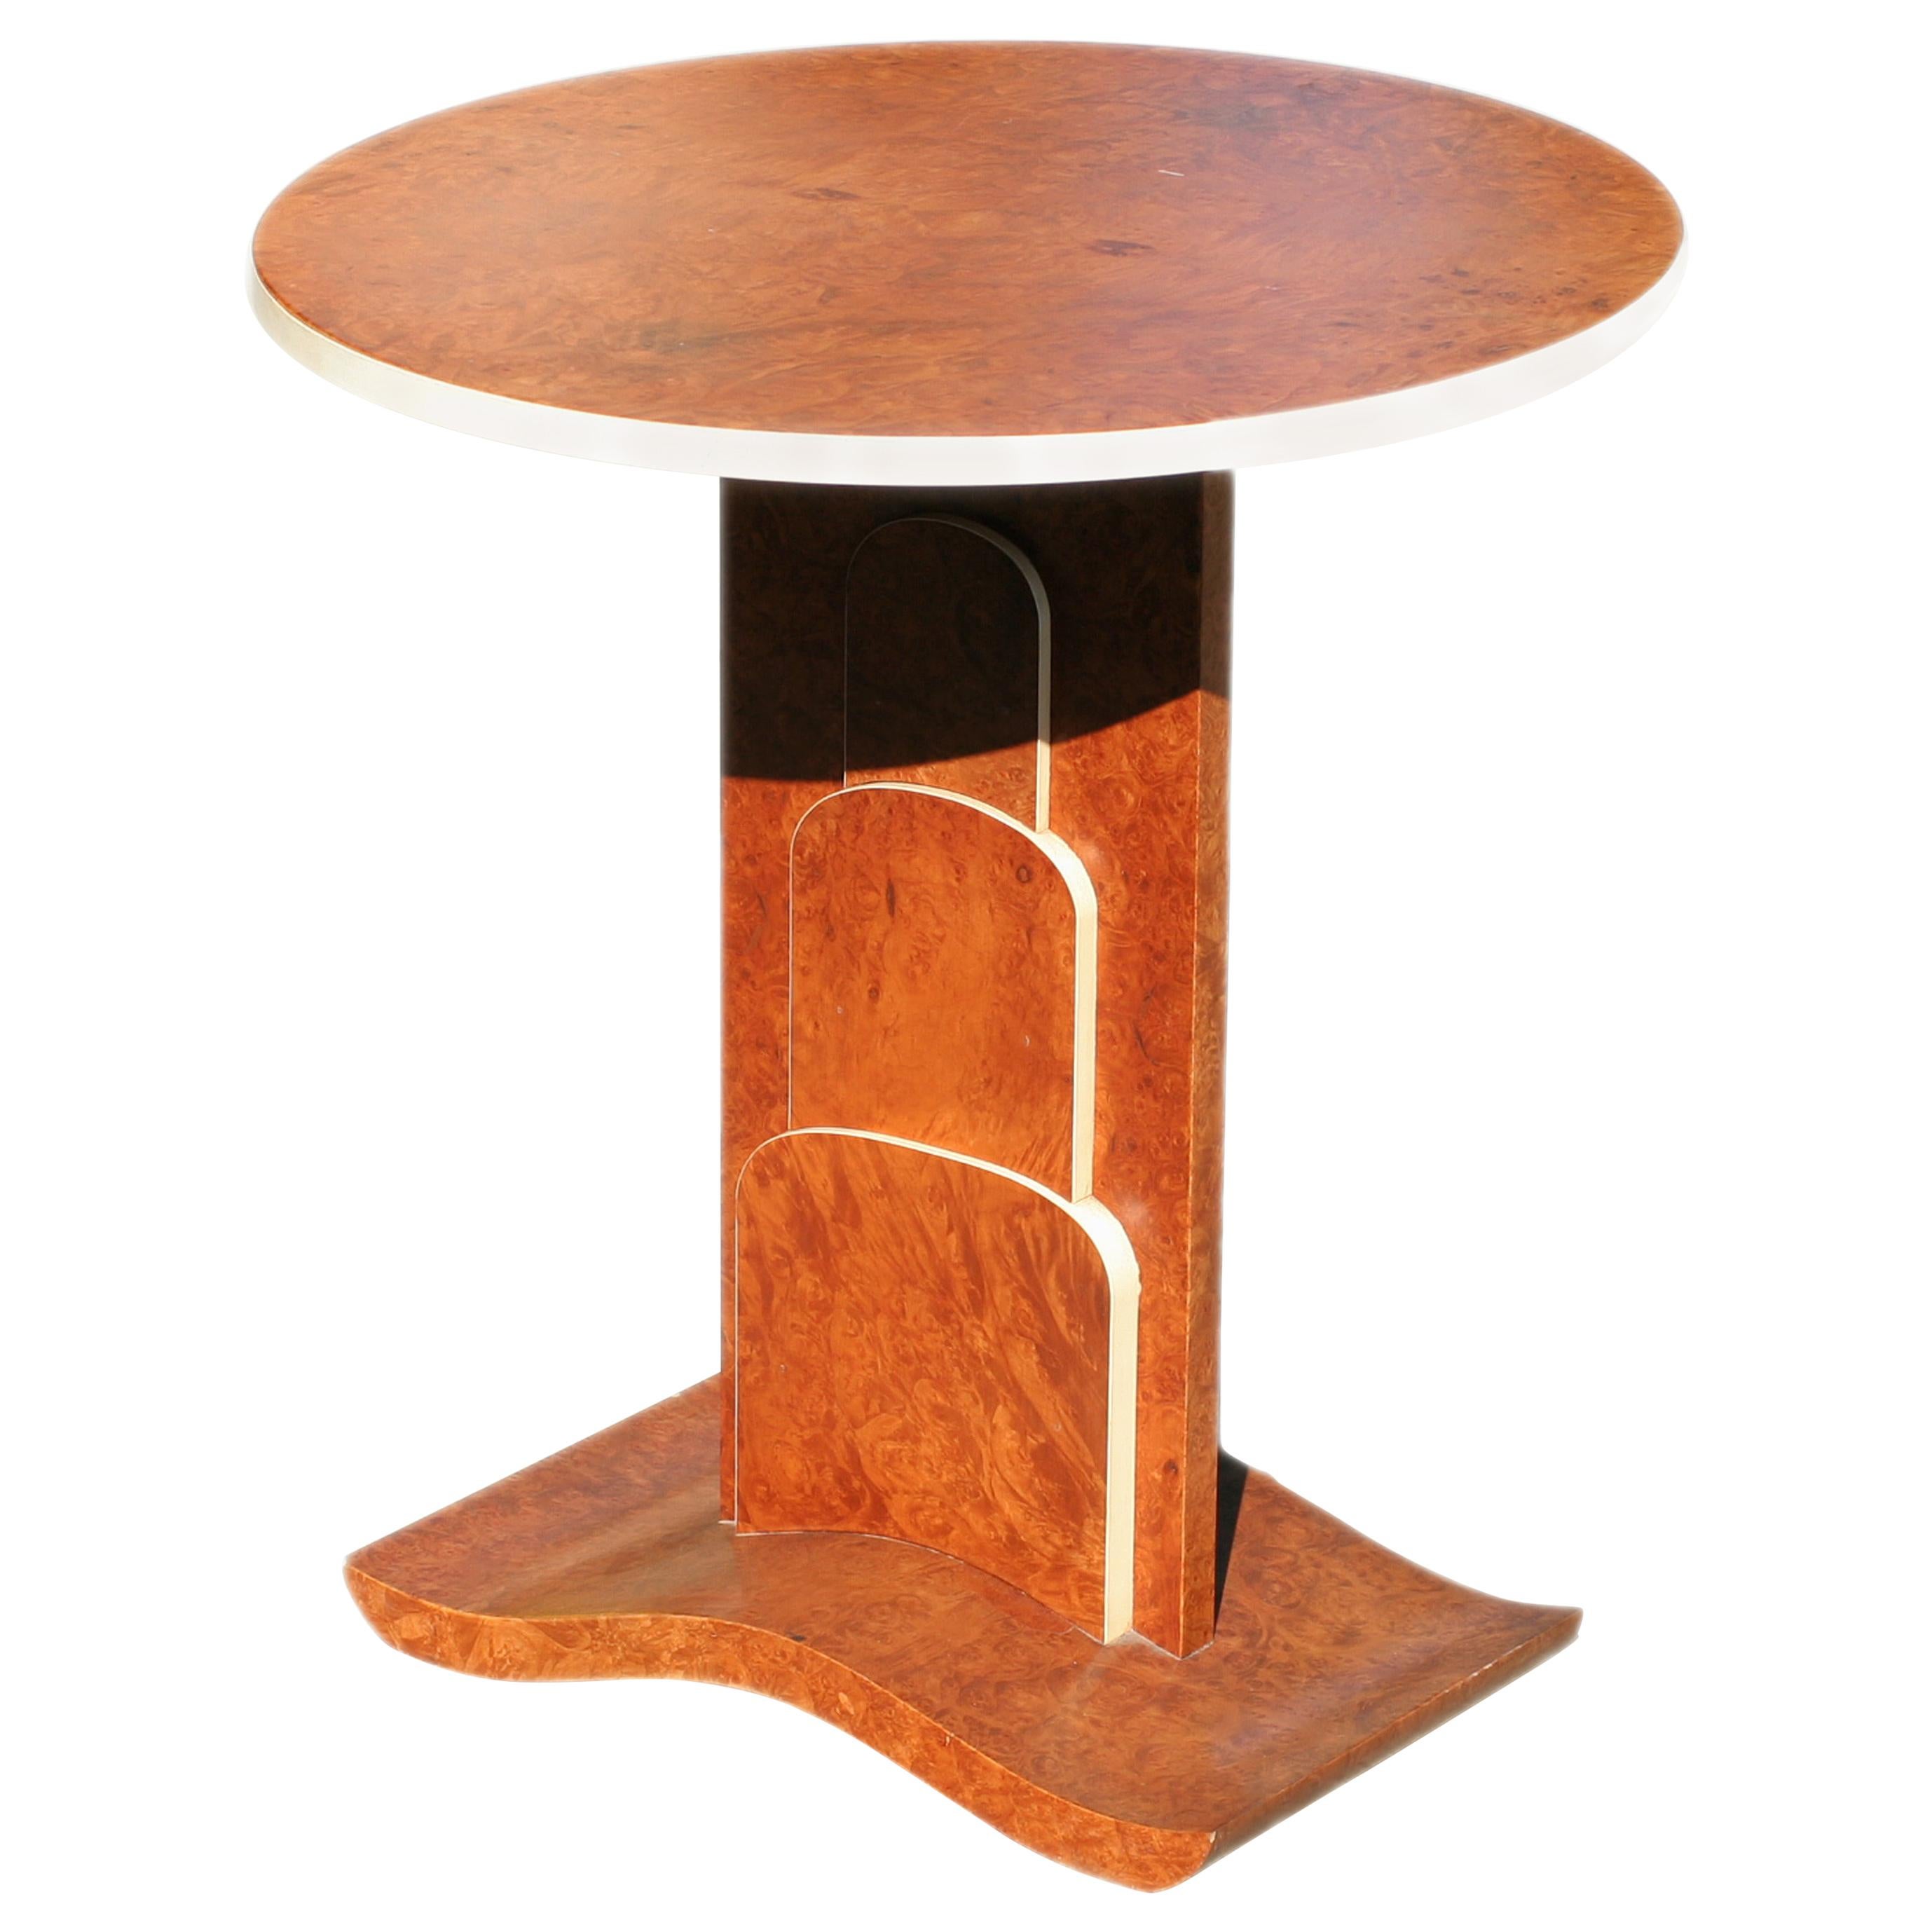 Art Deco Inspired Flip Table Pair in a Jacques Ruhlmann Manner